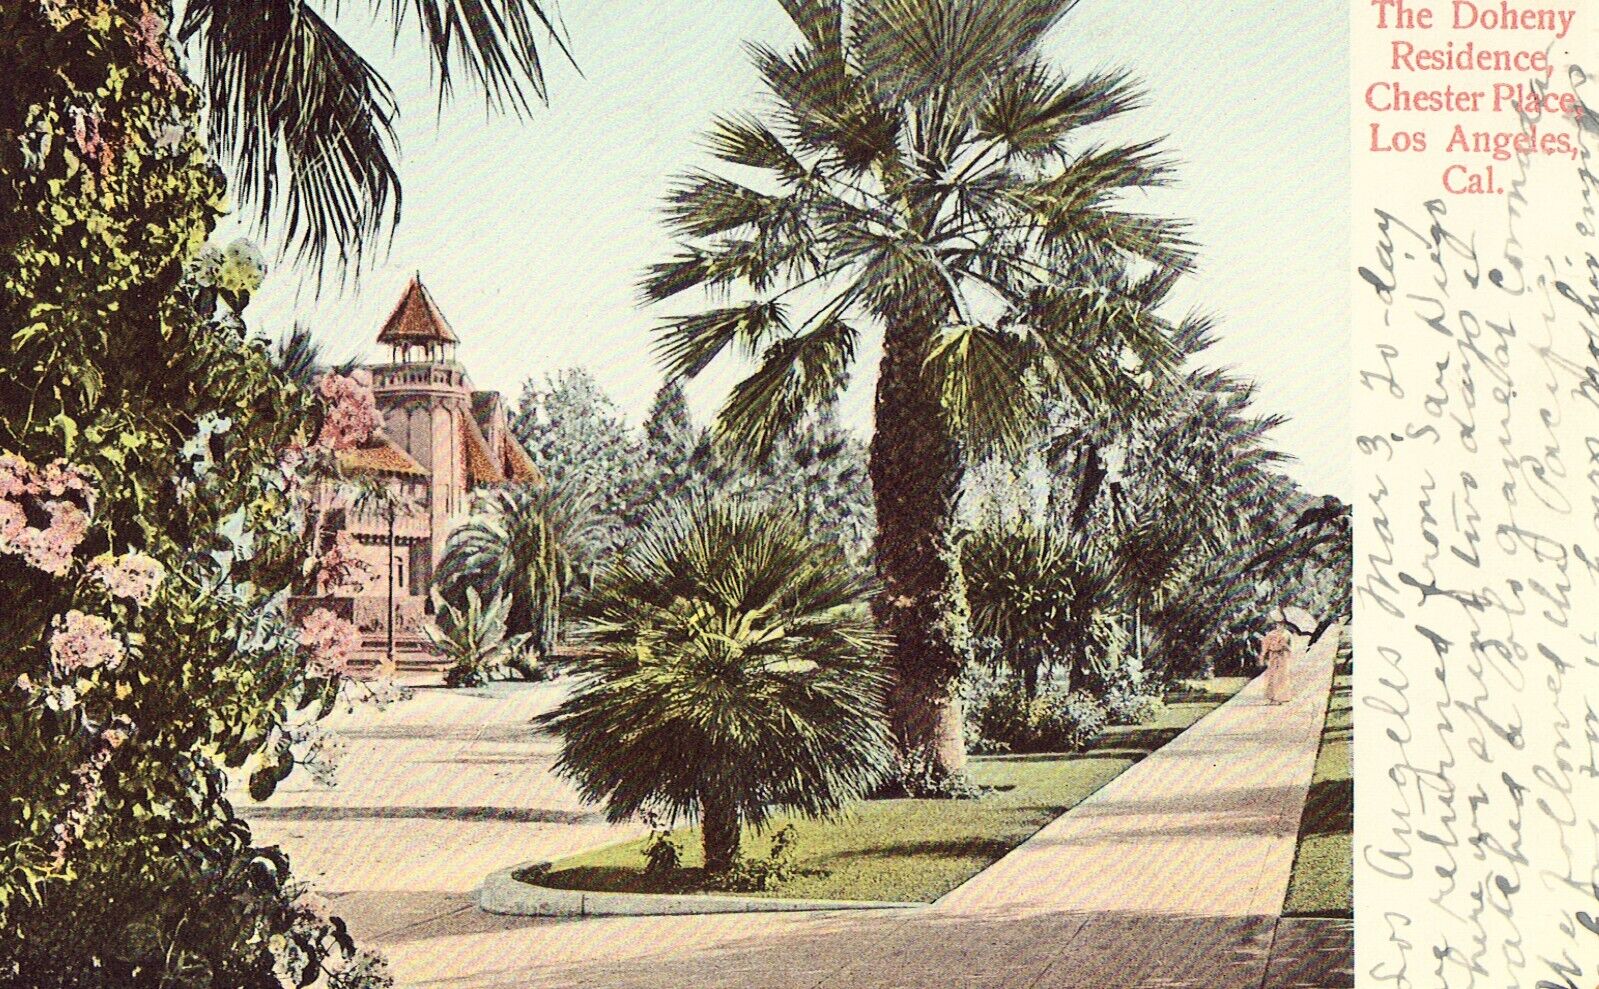 The Doheny Residence - Los Angeles, California 1906 Postcard